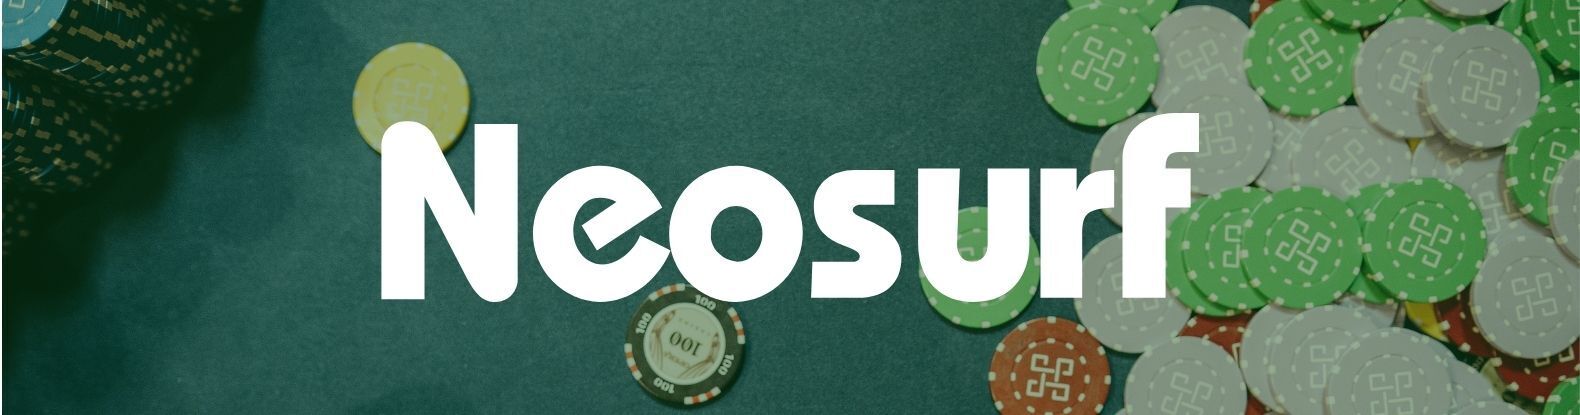 Neosurf is becoming ever more popular as a payment method at online casinos